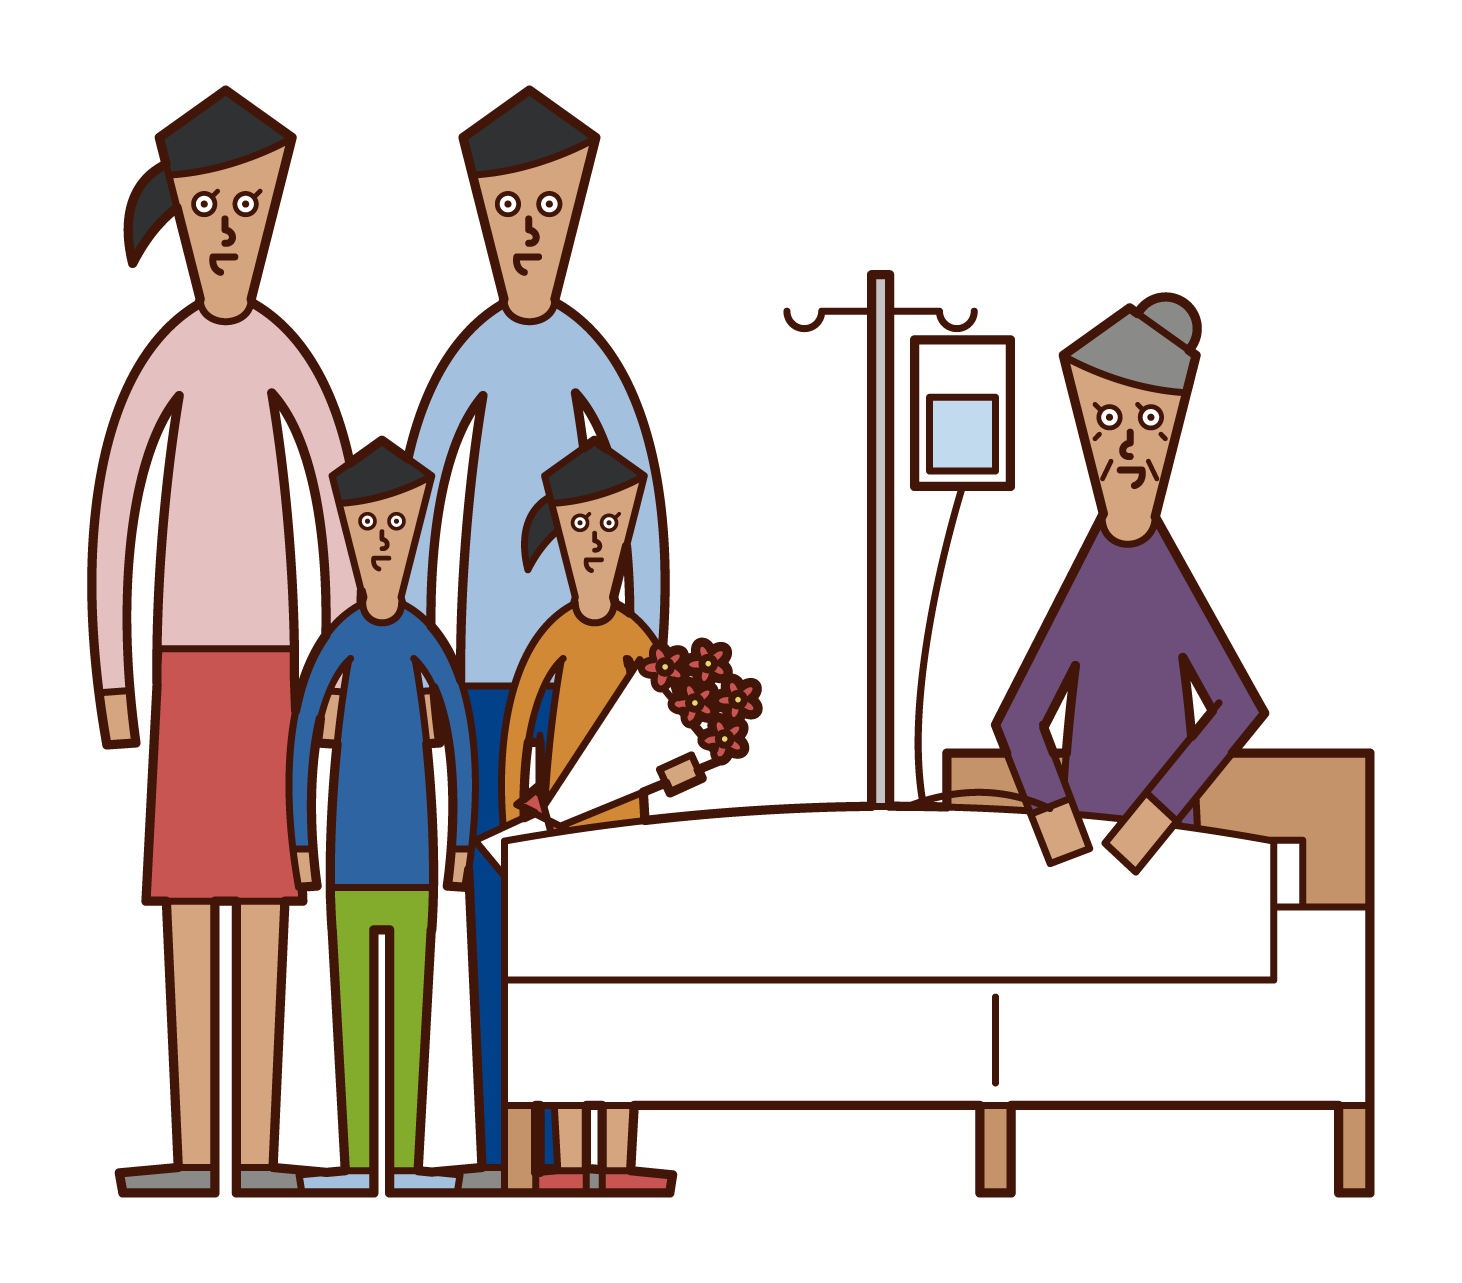 Illustration of a family visiting an old grandmother who is in hospital